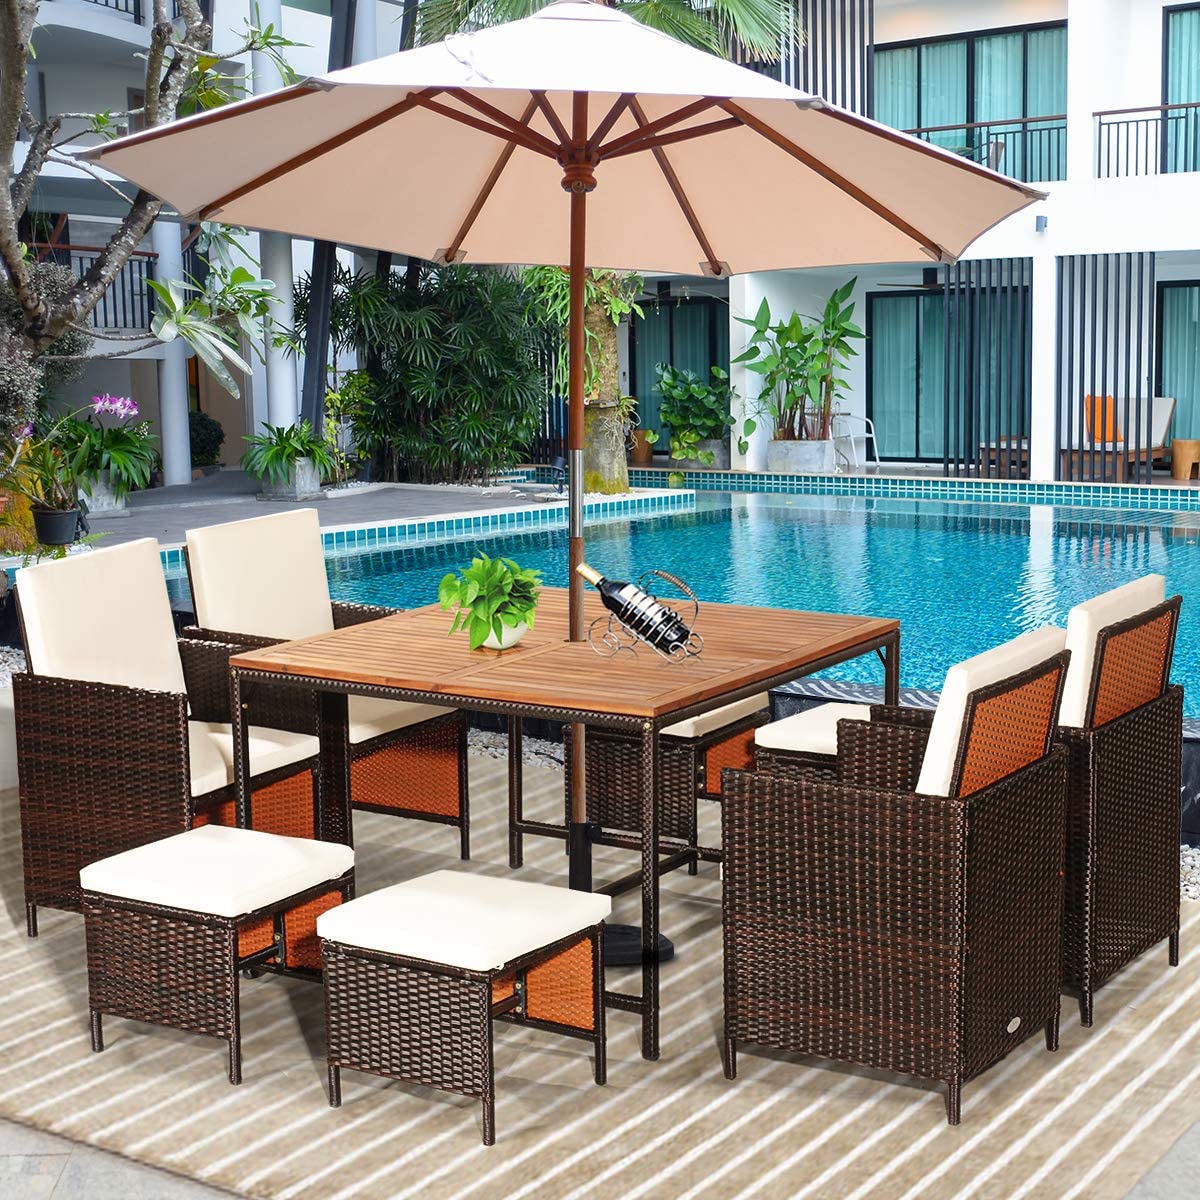 9 Pieces Outdoor Acacia Wood Dining Table Set Patio Space Saving Wicker Furniture Set with Cushion and Umbrella Hole